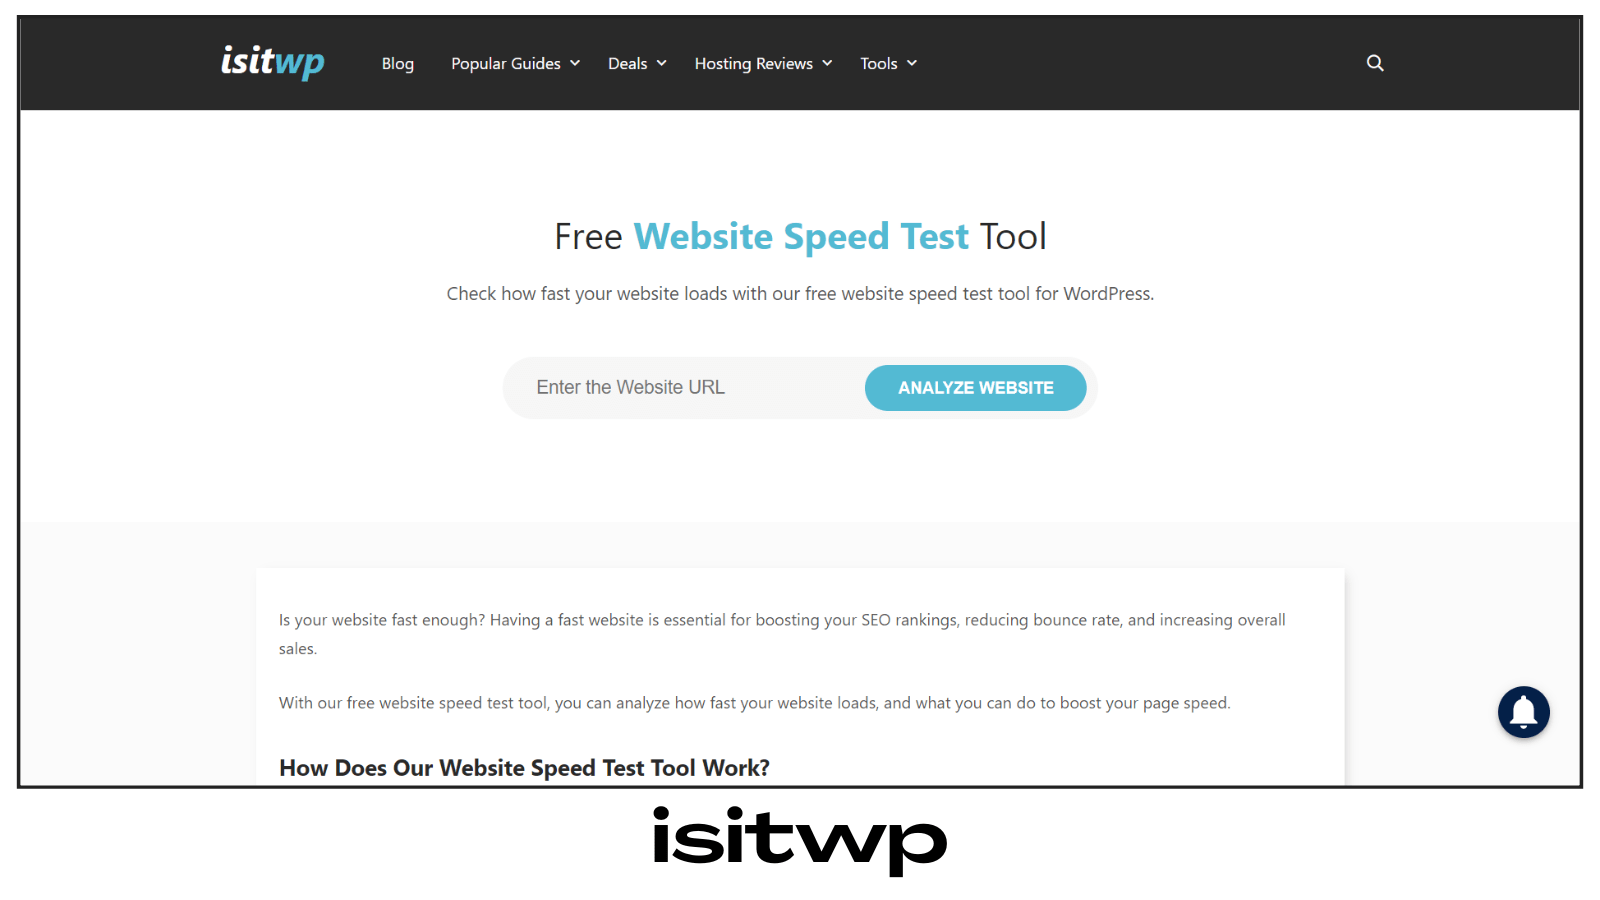 isitwp